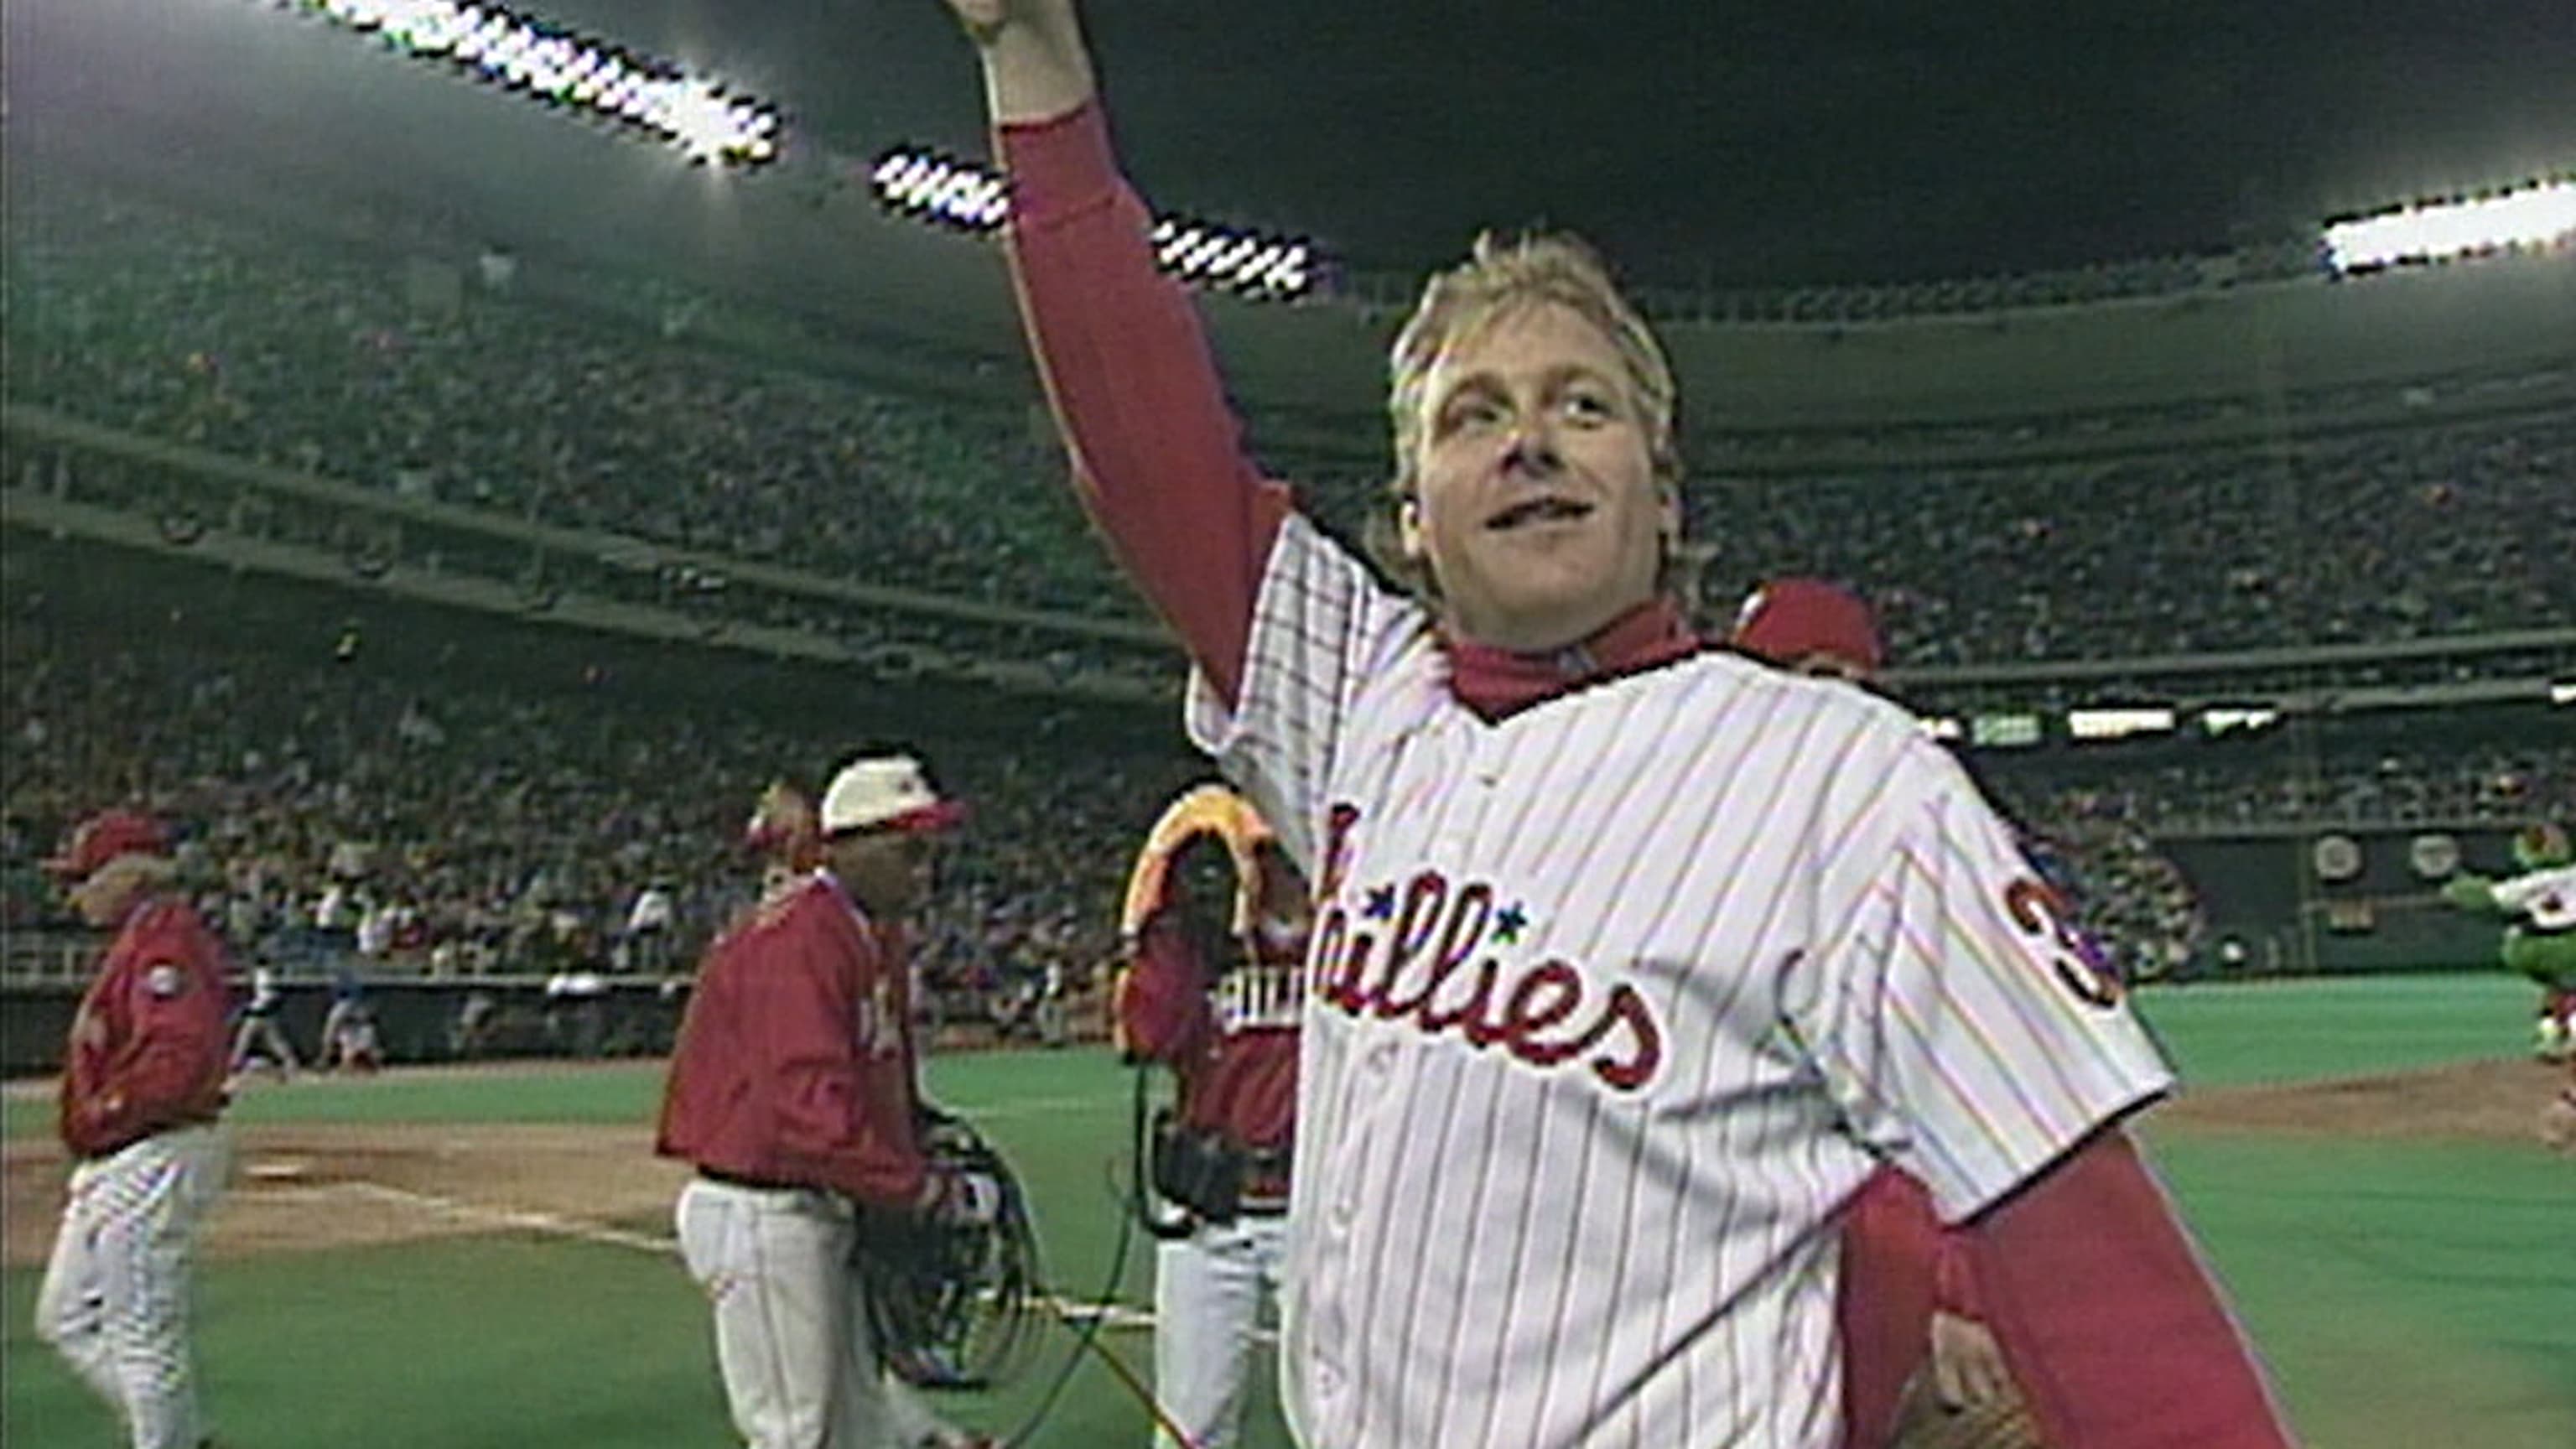 Photos: Curt Schilling through the years